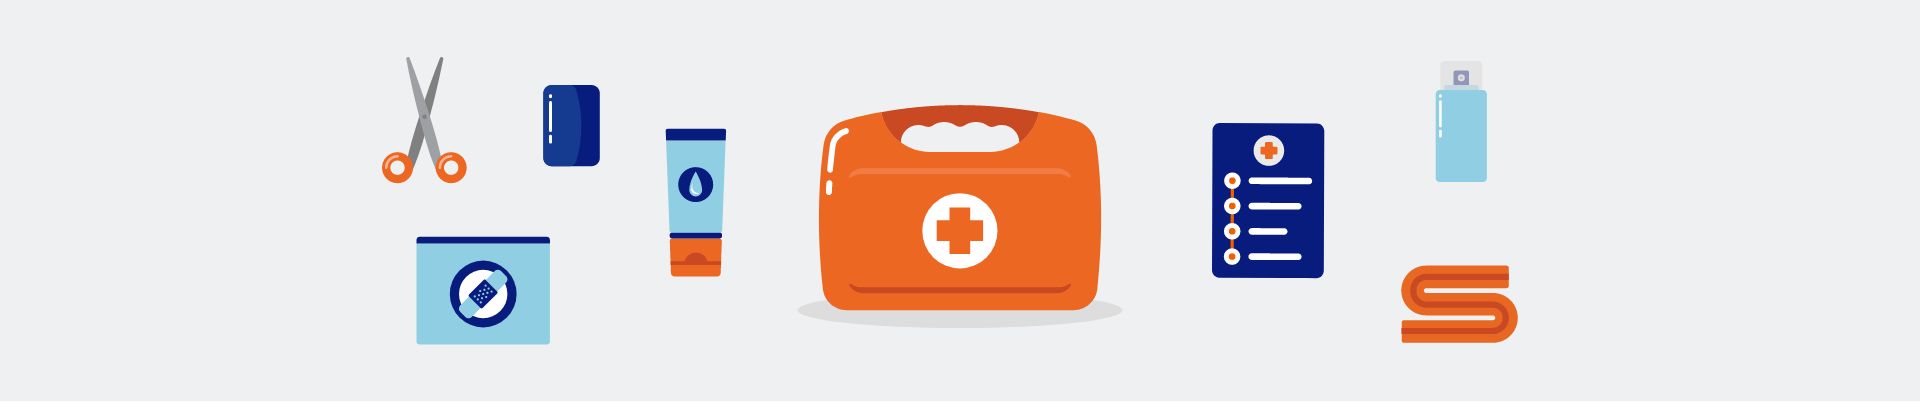 Illustration of an emergency first aid kit